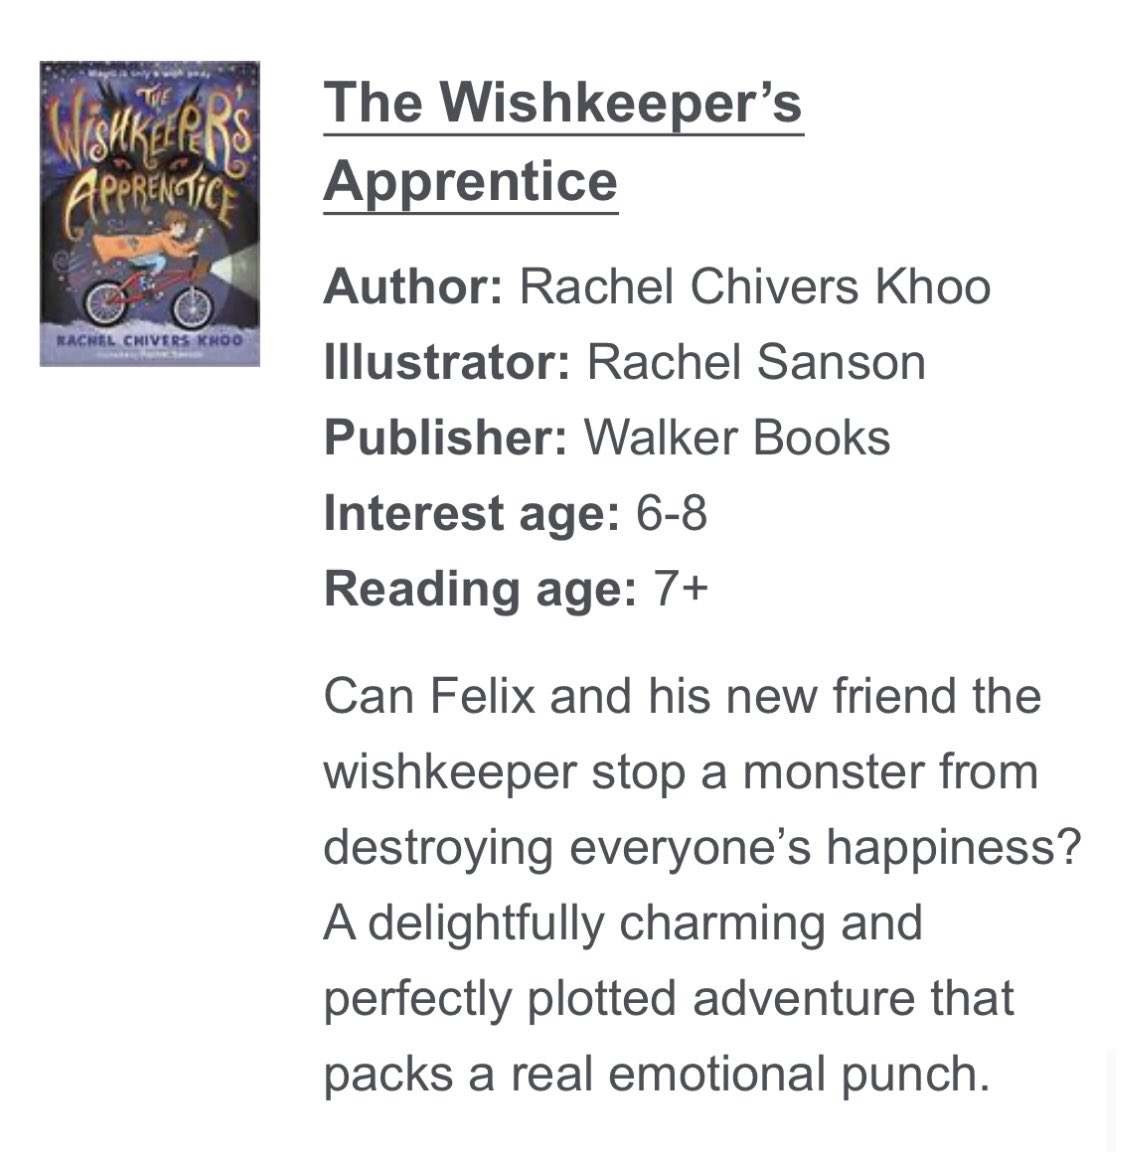 Over the moon to see The Wishkeeper’s Apprentice in the 2023 @Booktrust #GreatBooksGuide 💫 Thank you so much! What a gorgeous selection of books. 📚✨ @WalkerBooksUK @rachel_sanson